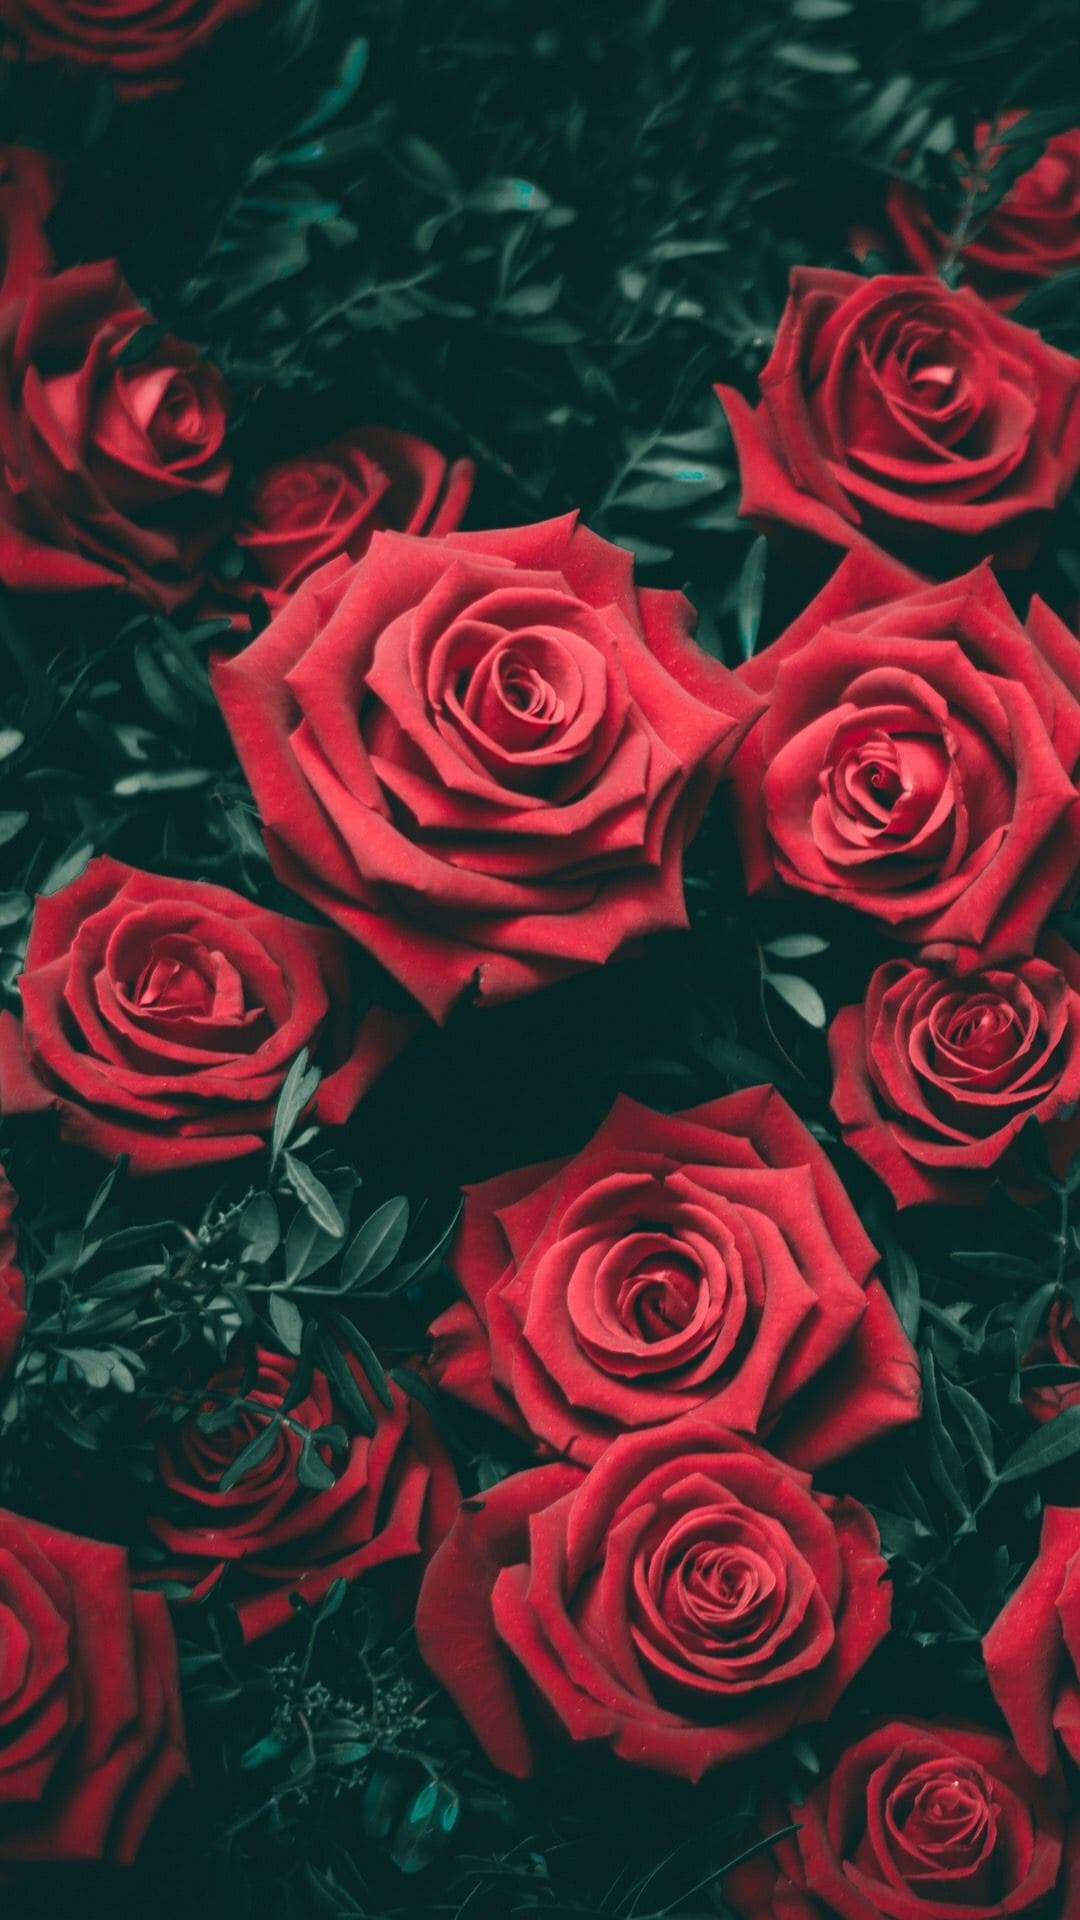 Rose Wallpapers - Top 35 Best Rose Backgrounds Download